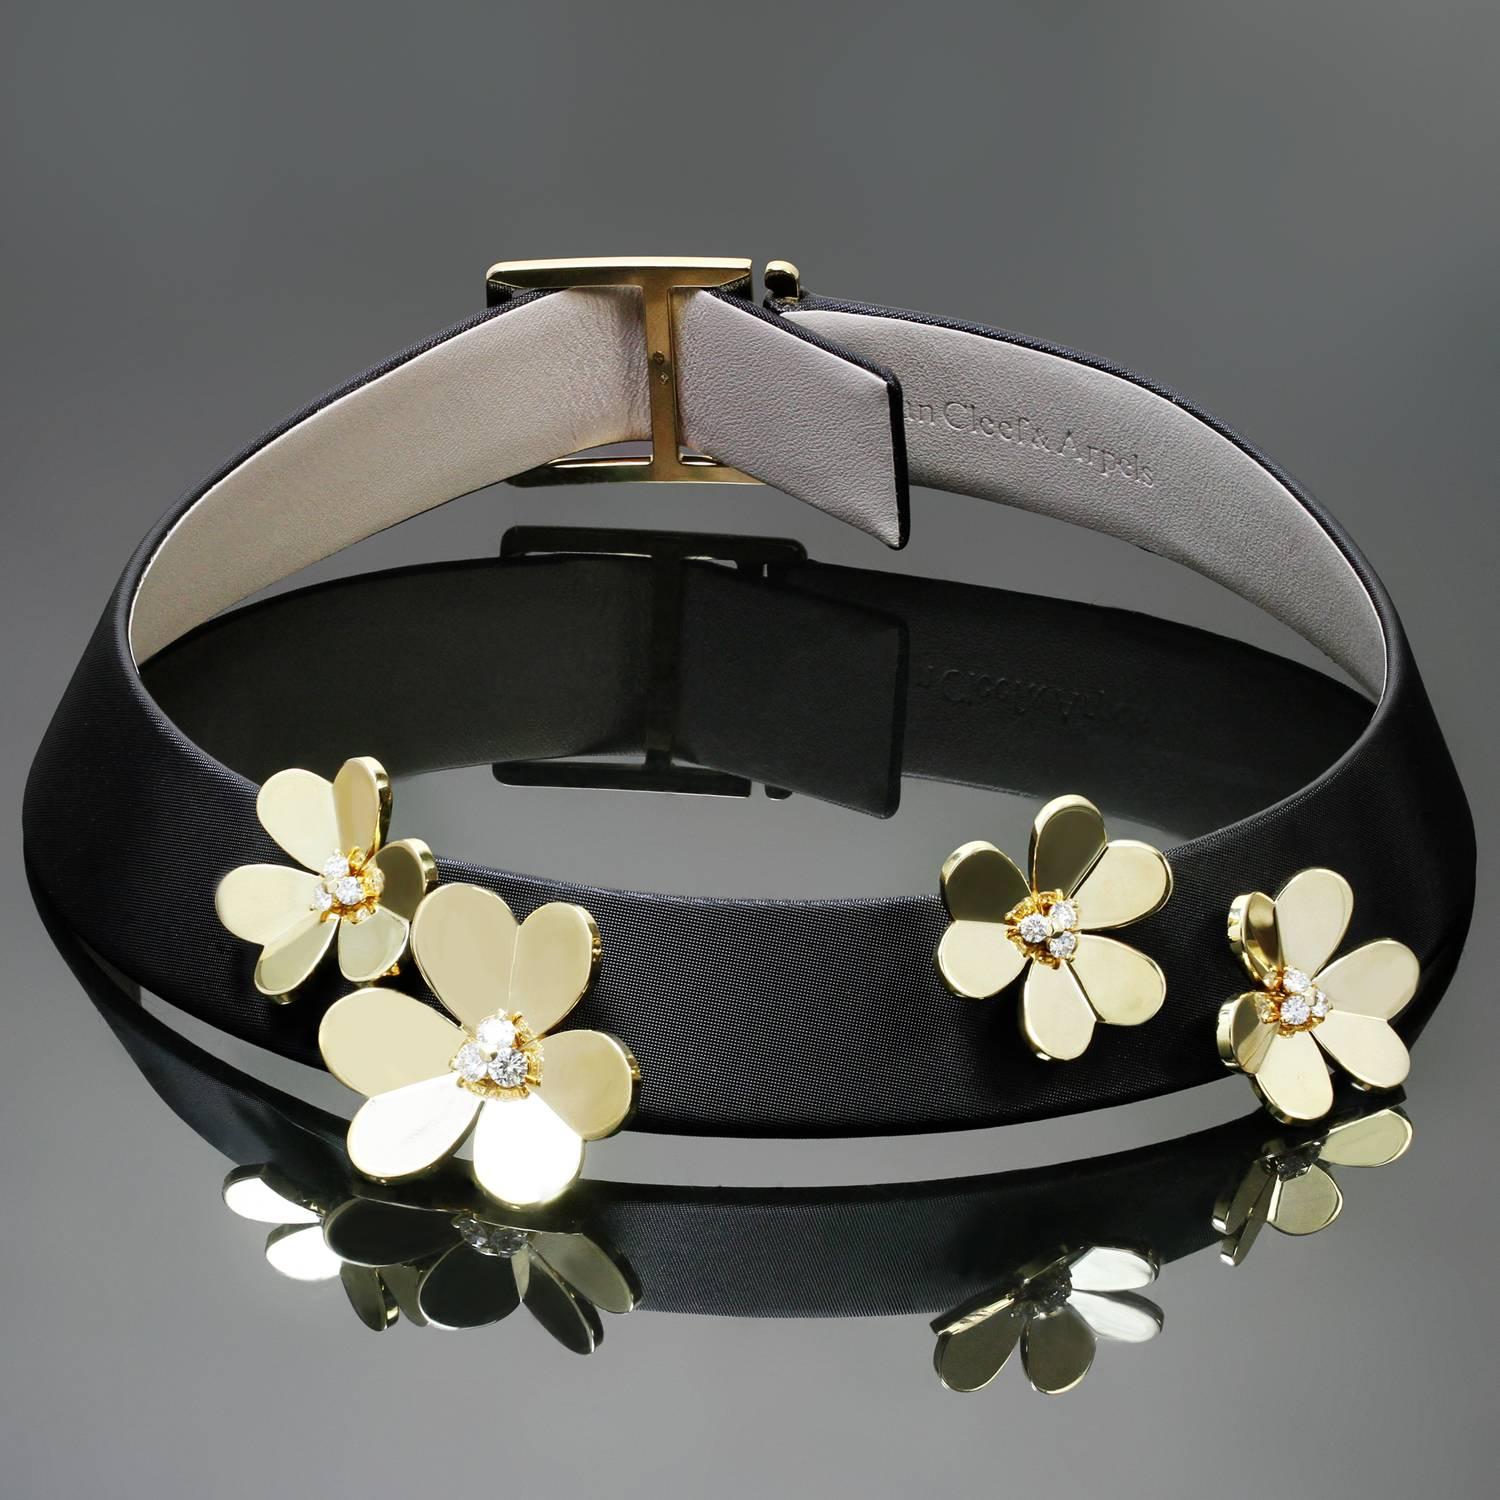 This rare and fabulous choker necklace from the famous Frivole collection by Van Cleef and Arpels features an adjustable Ravena cord with four 18k yellow gold flowers accented with sparkling prong-set clusters of brilliant-cut round diamonds of an